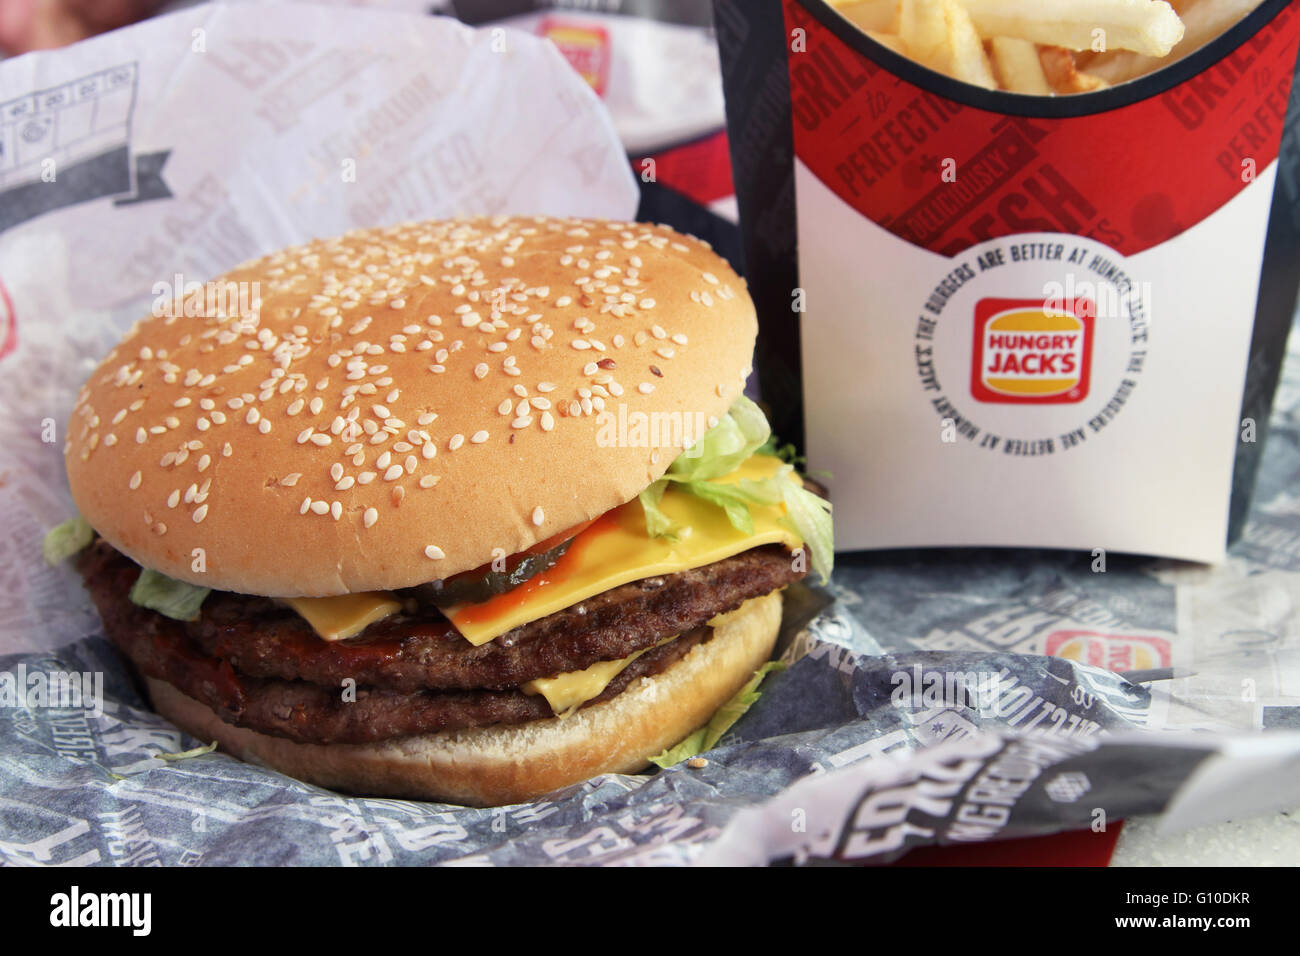 Hungry Jack's (Burger King) fast food beef burger Stock Photo